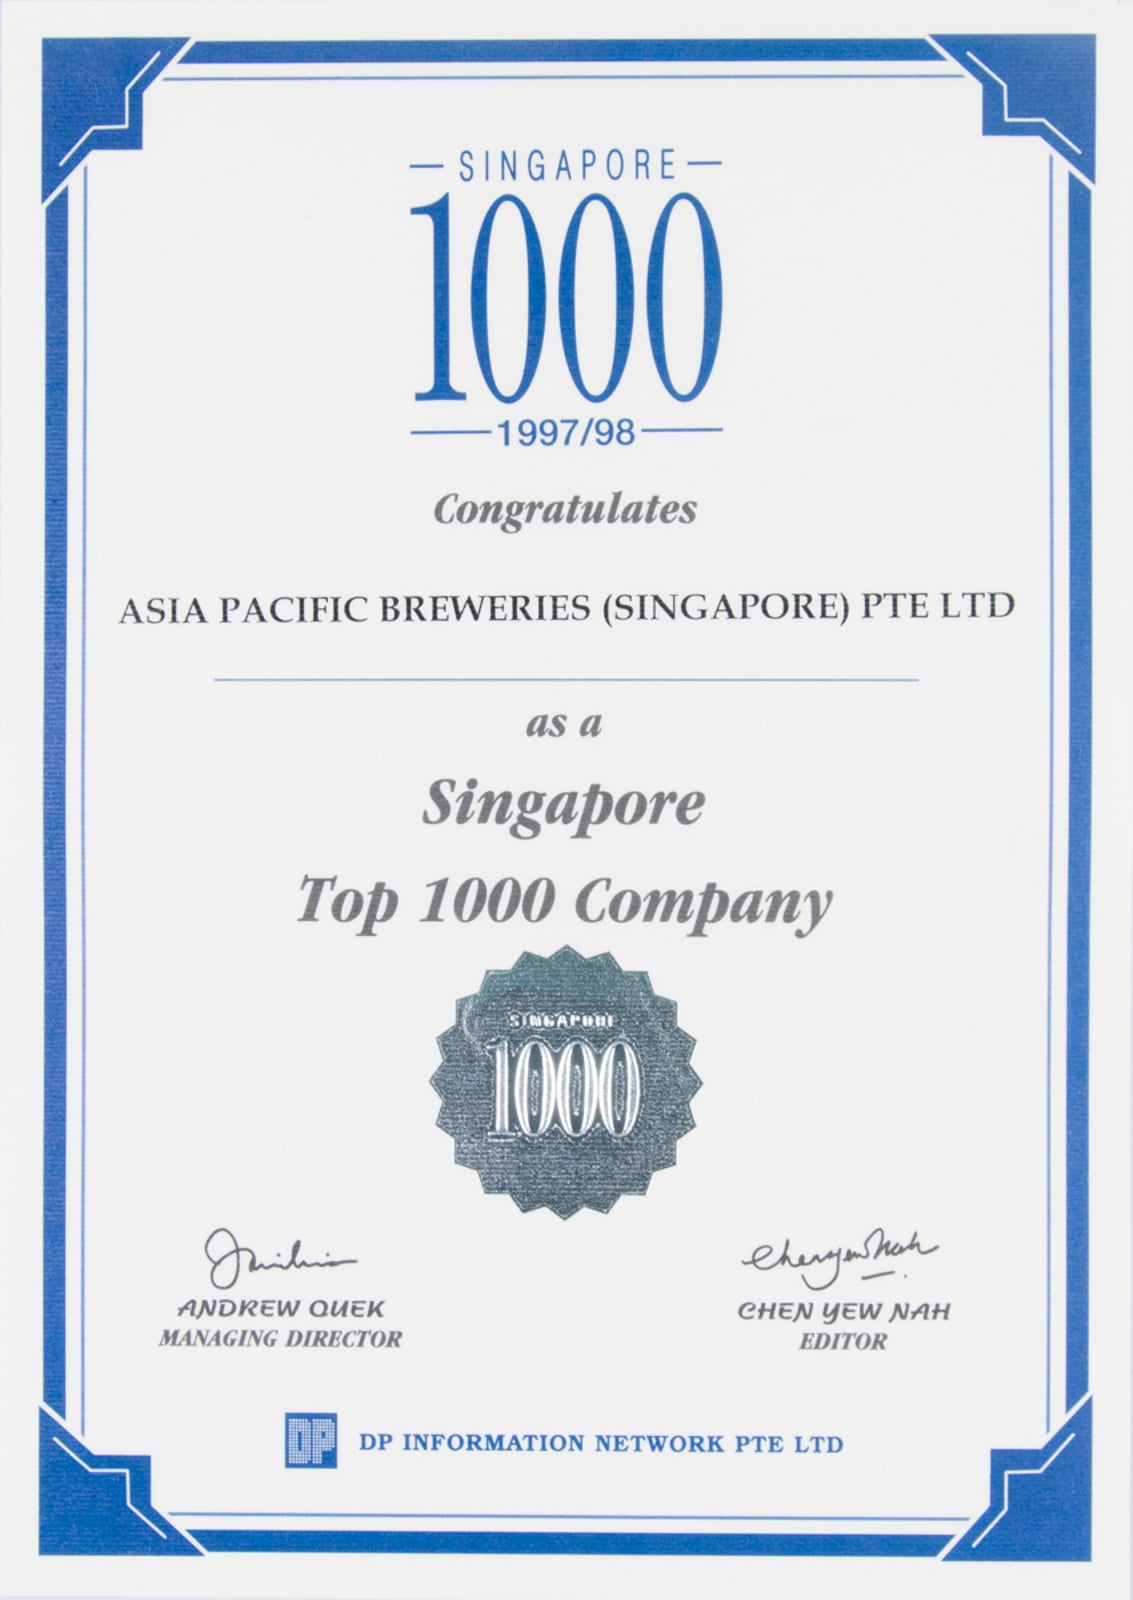 APBS Singapore 1000 Company, DP Information Group Certificate 1997/98